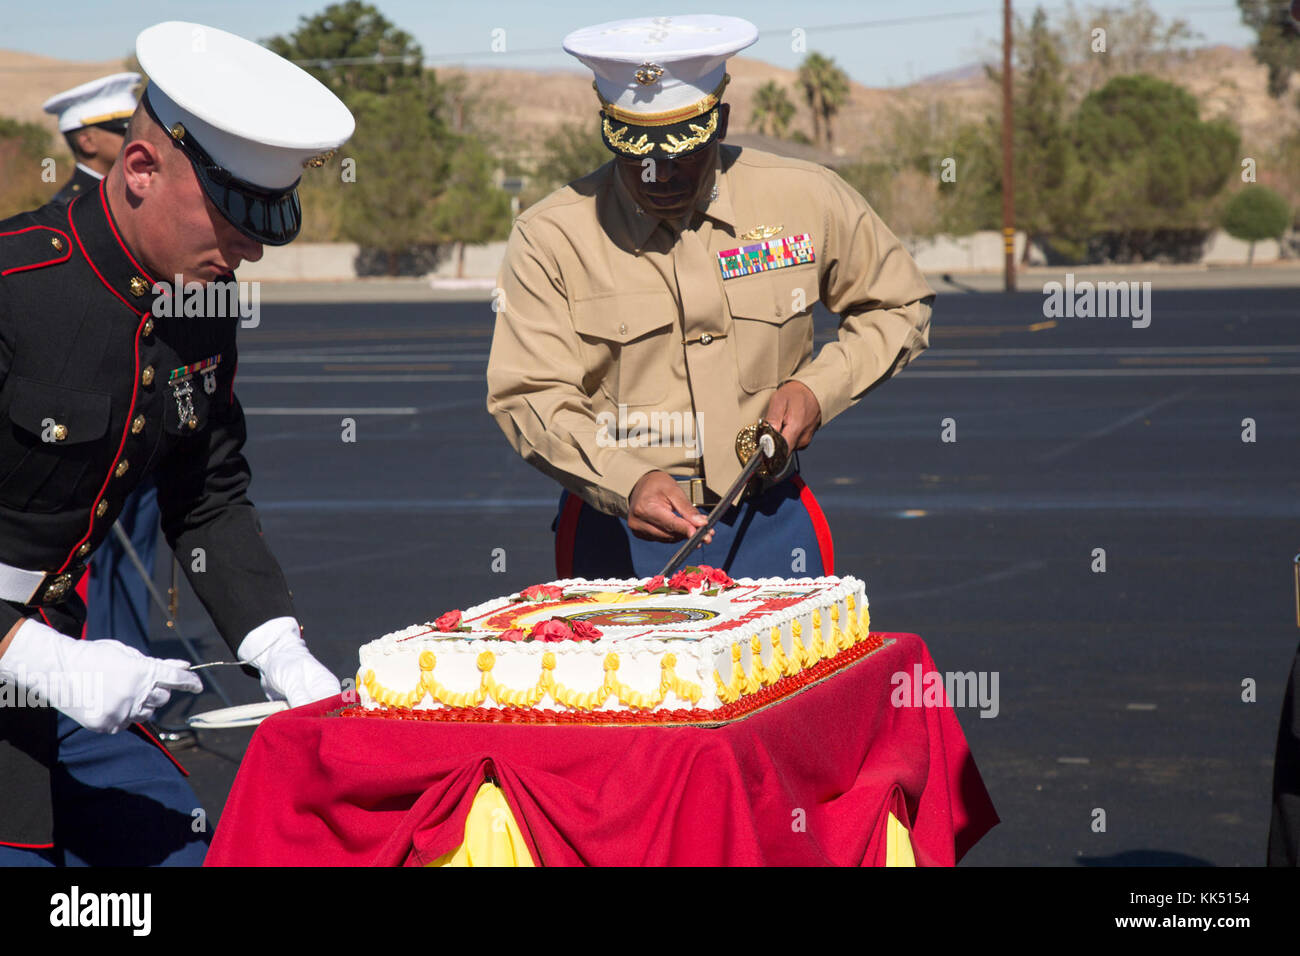 Colonel Sekou Karega, commander, Marine Corps Logistics Base Barstow, Calif., cuts the traditional birthday cake during a ceremony on the Parade Deck Nov. 8 commemorating the 242nd anniversary of the founding of the Marine Corps. The Marines were formed as an American fighting force Nov. 10, 1775 during a meeting at Tun Tavern in Philadelphia. Stock Photo